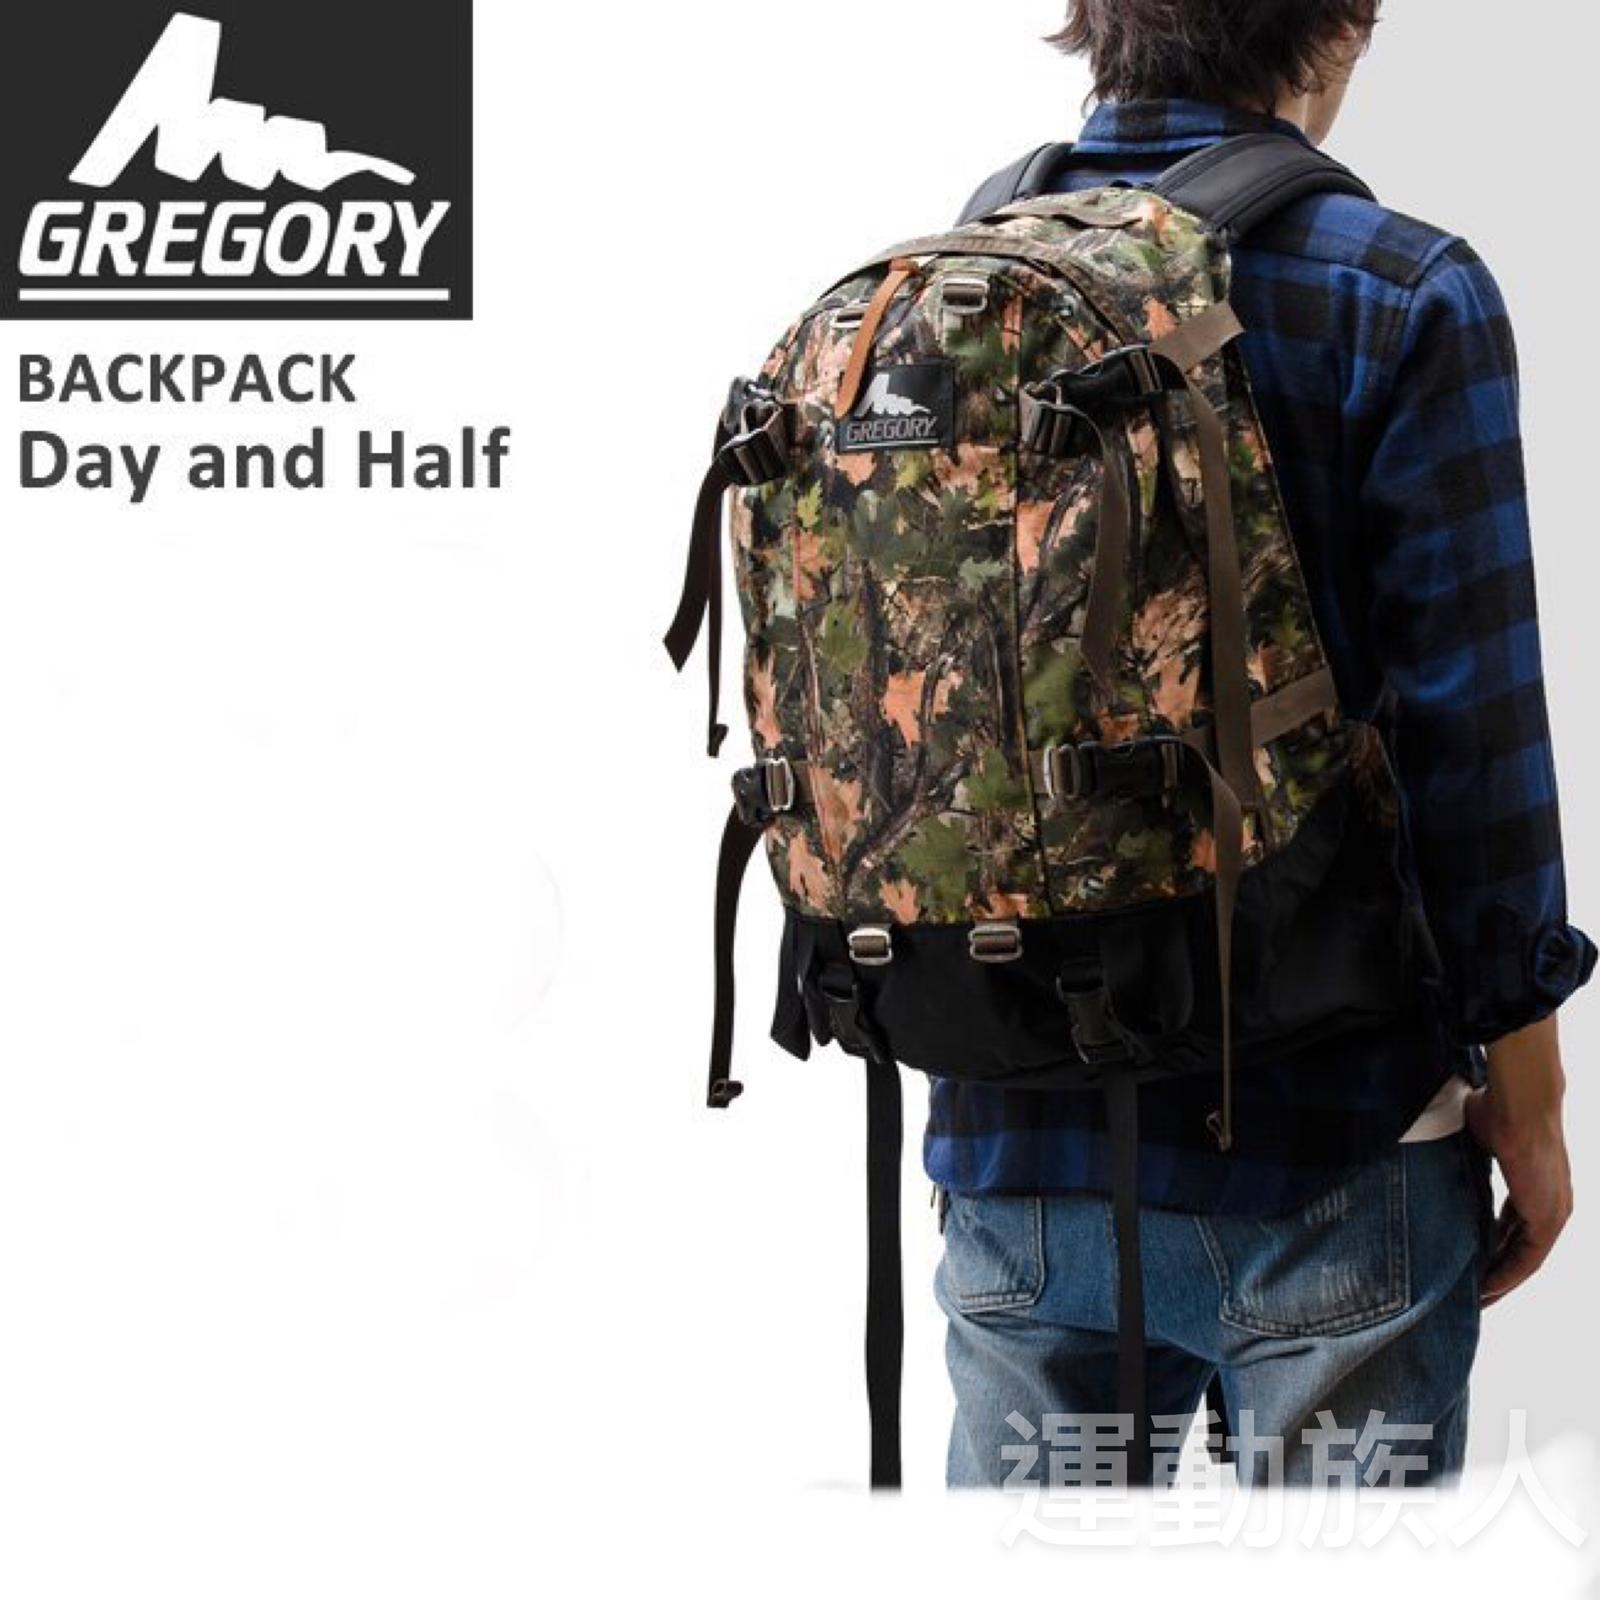 gregory day and a half backpack